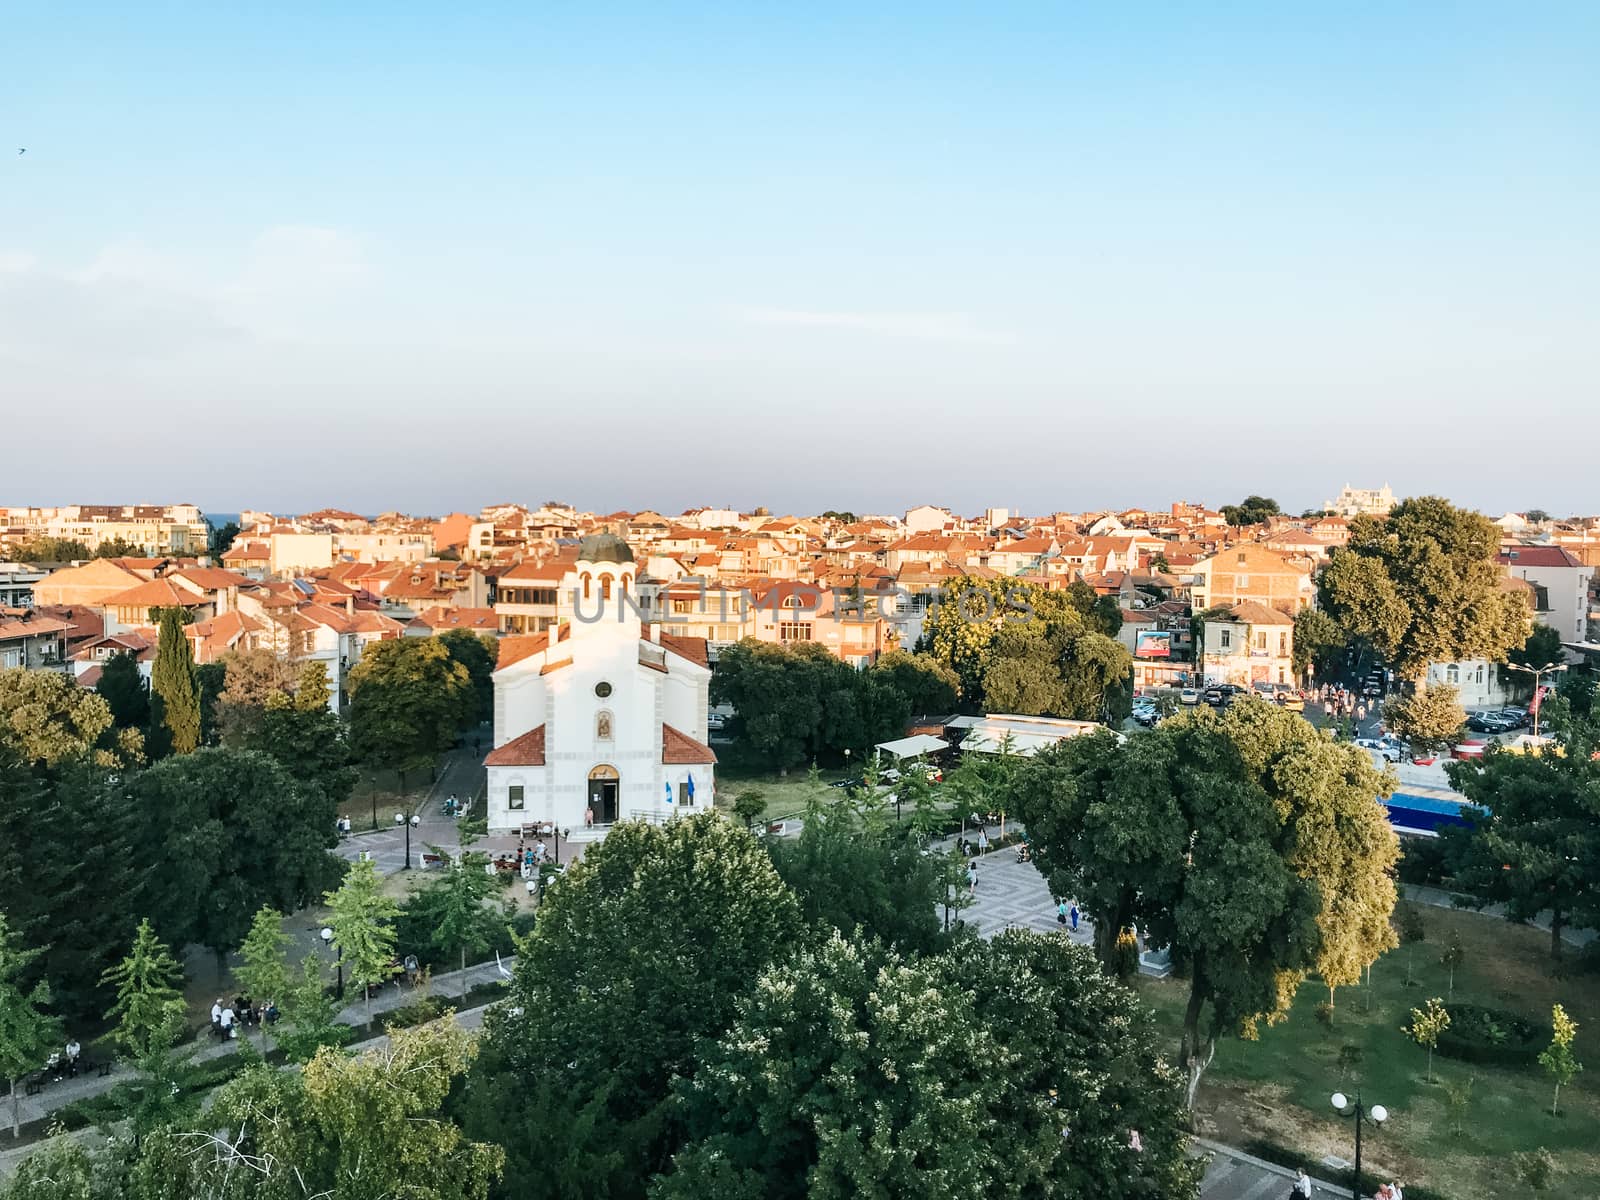 Pomorie, Bulgaria - September 03, 2019: Pomorie Is A Town And Seaside Resort In Southeastern Bulgaria, Located On A Narrow Rocky Peninsula In Burgas Bay On The Southern Bulgarian Black Sea Coast.